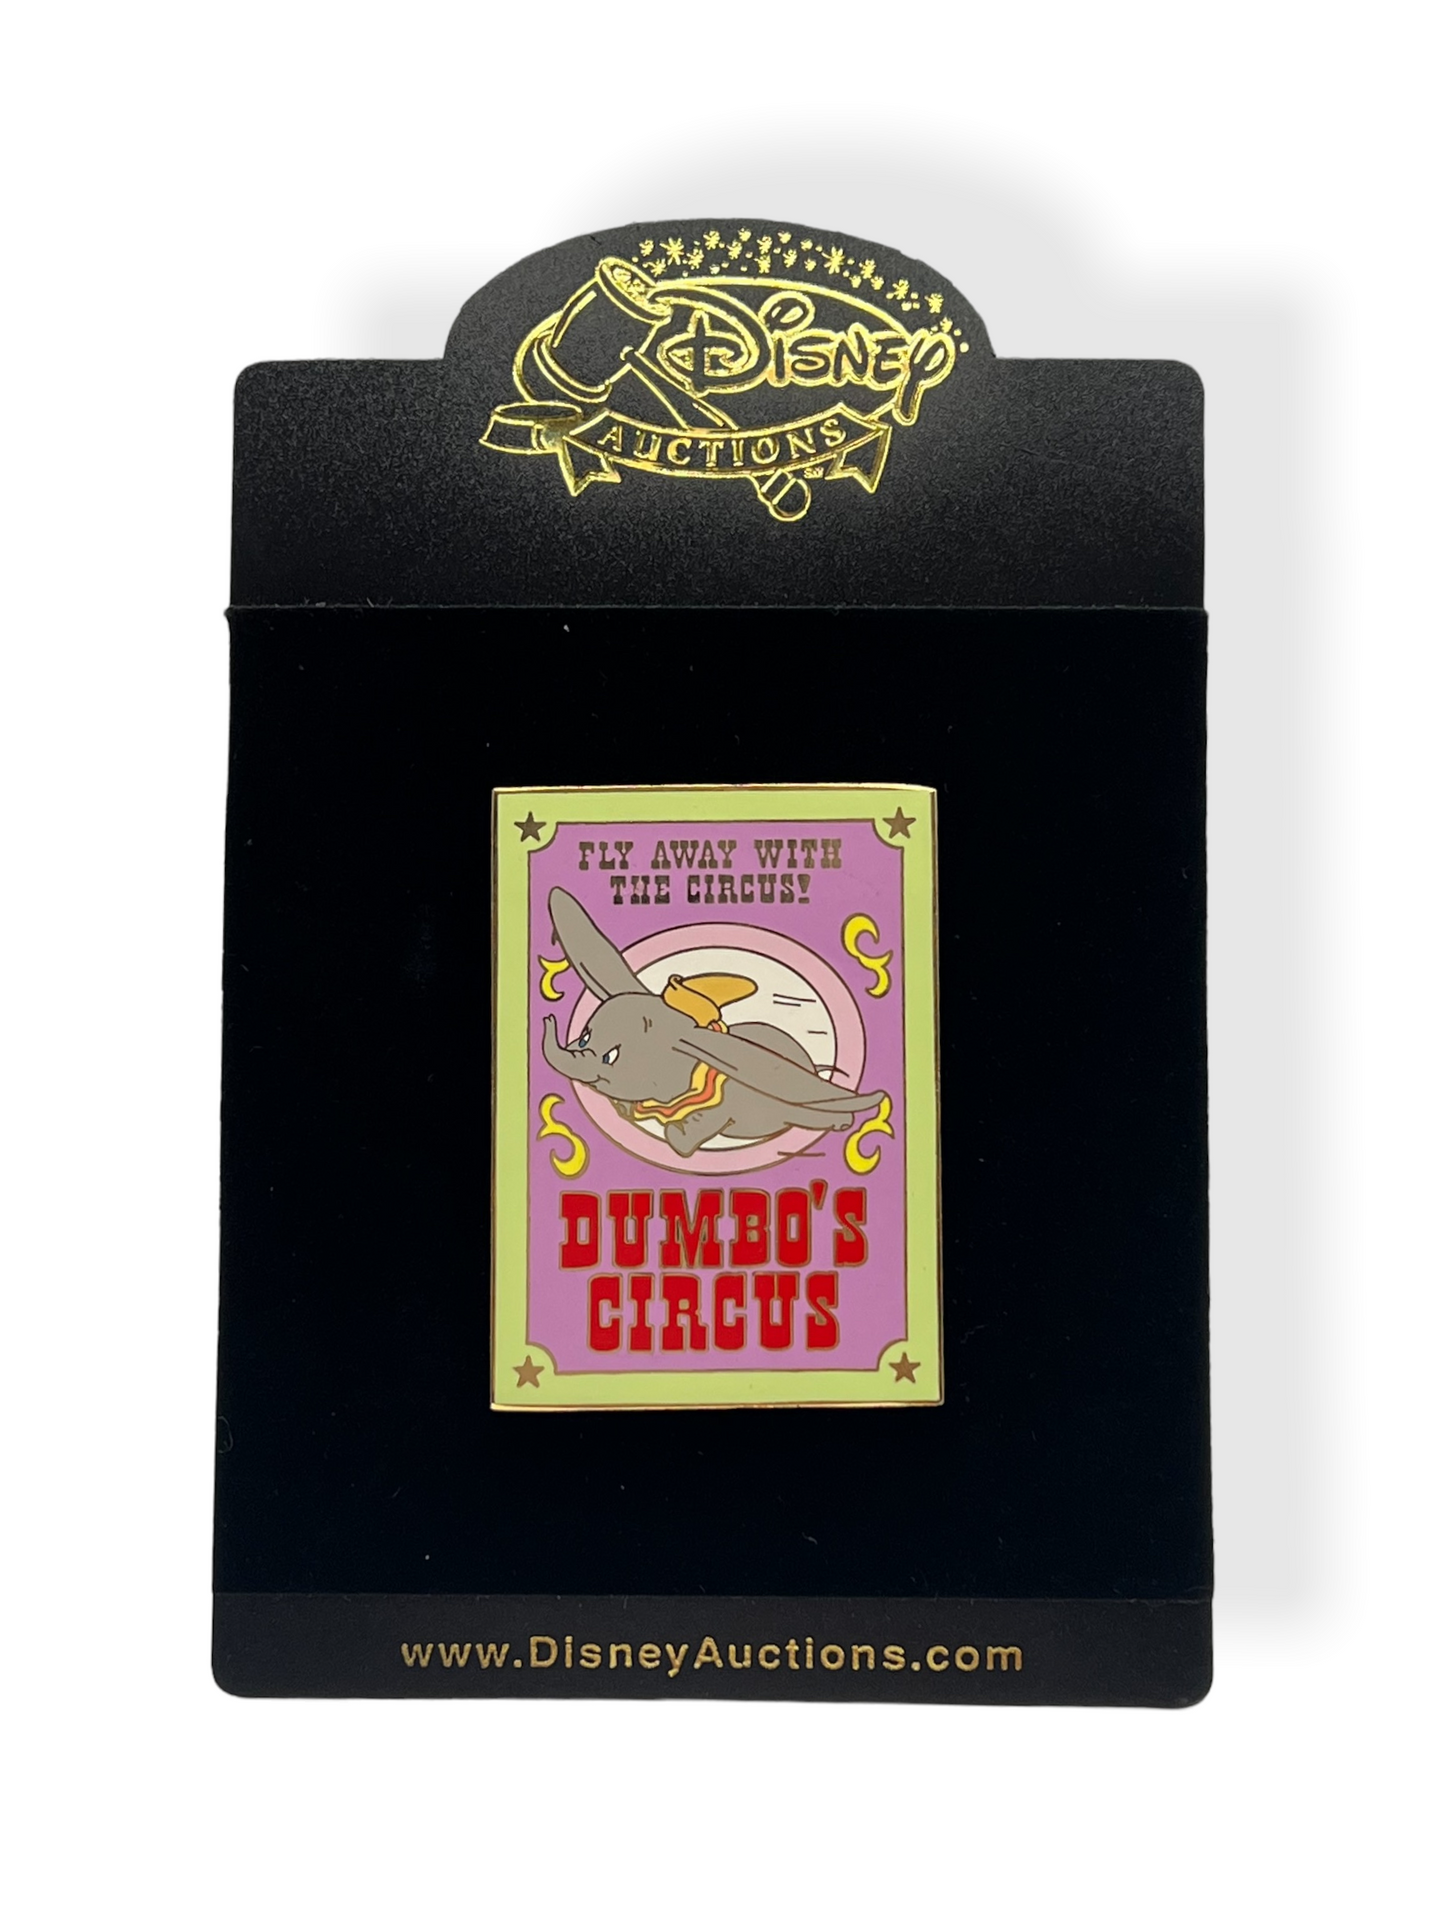 Disney Auctions Business Ads Dumbo’s Circus Pin